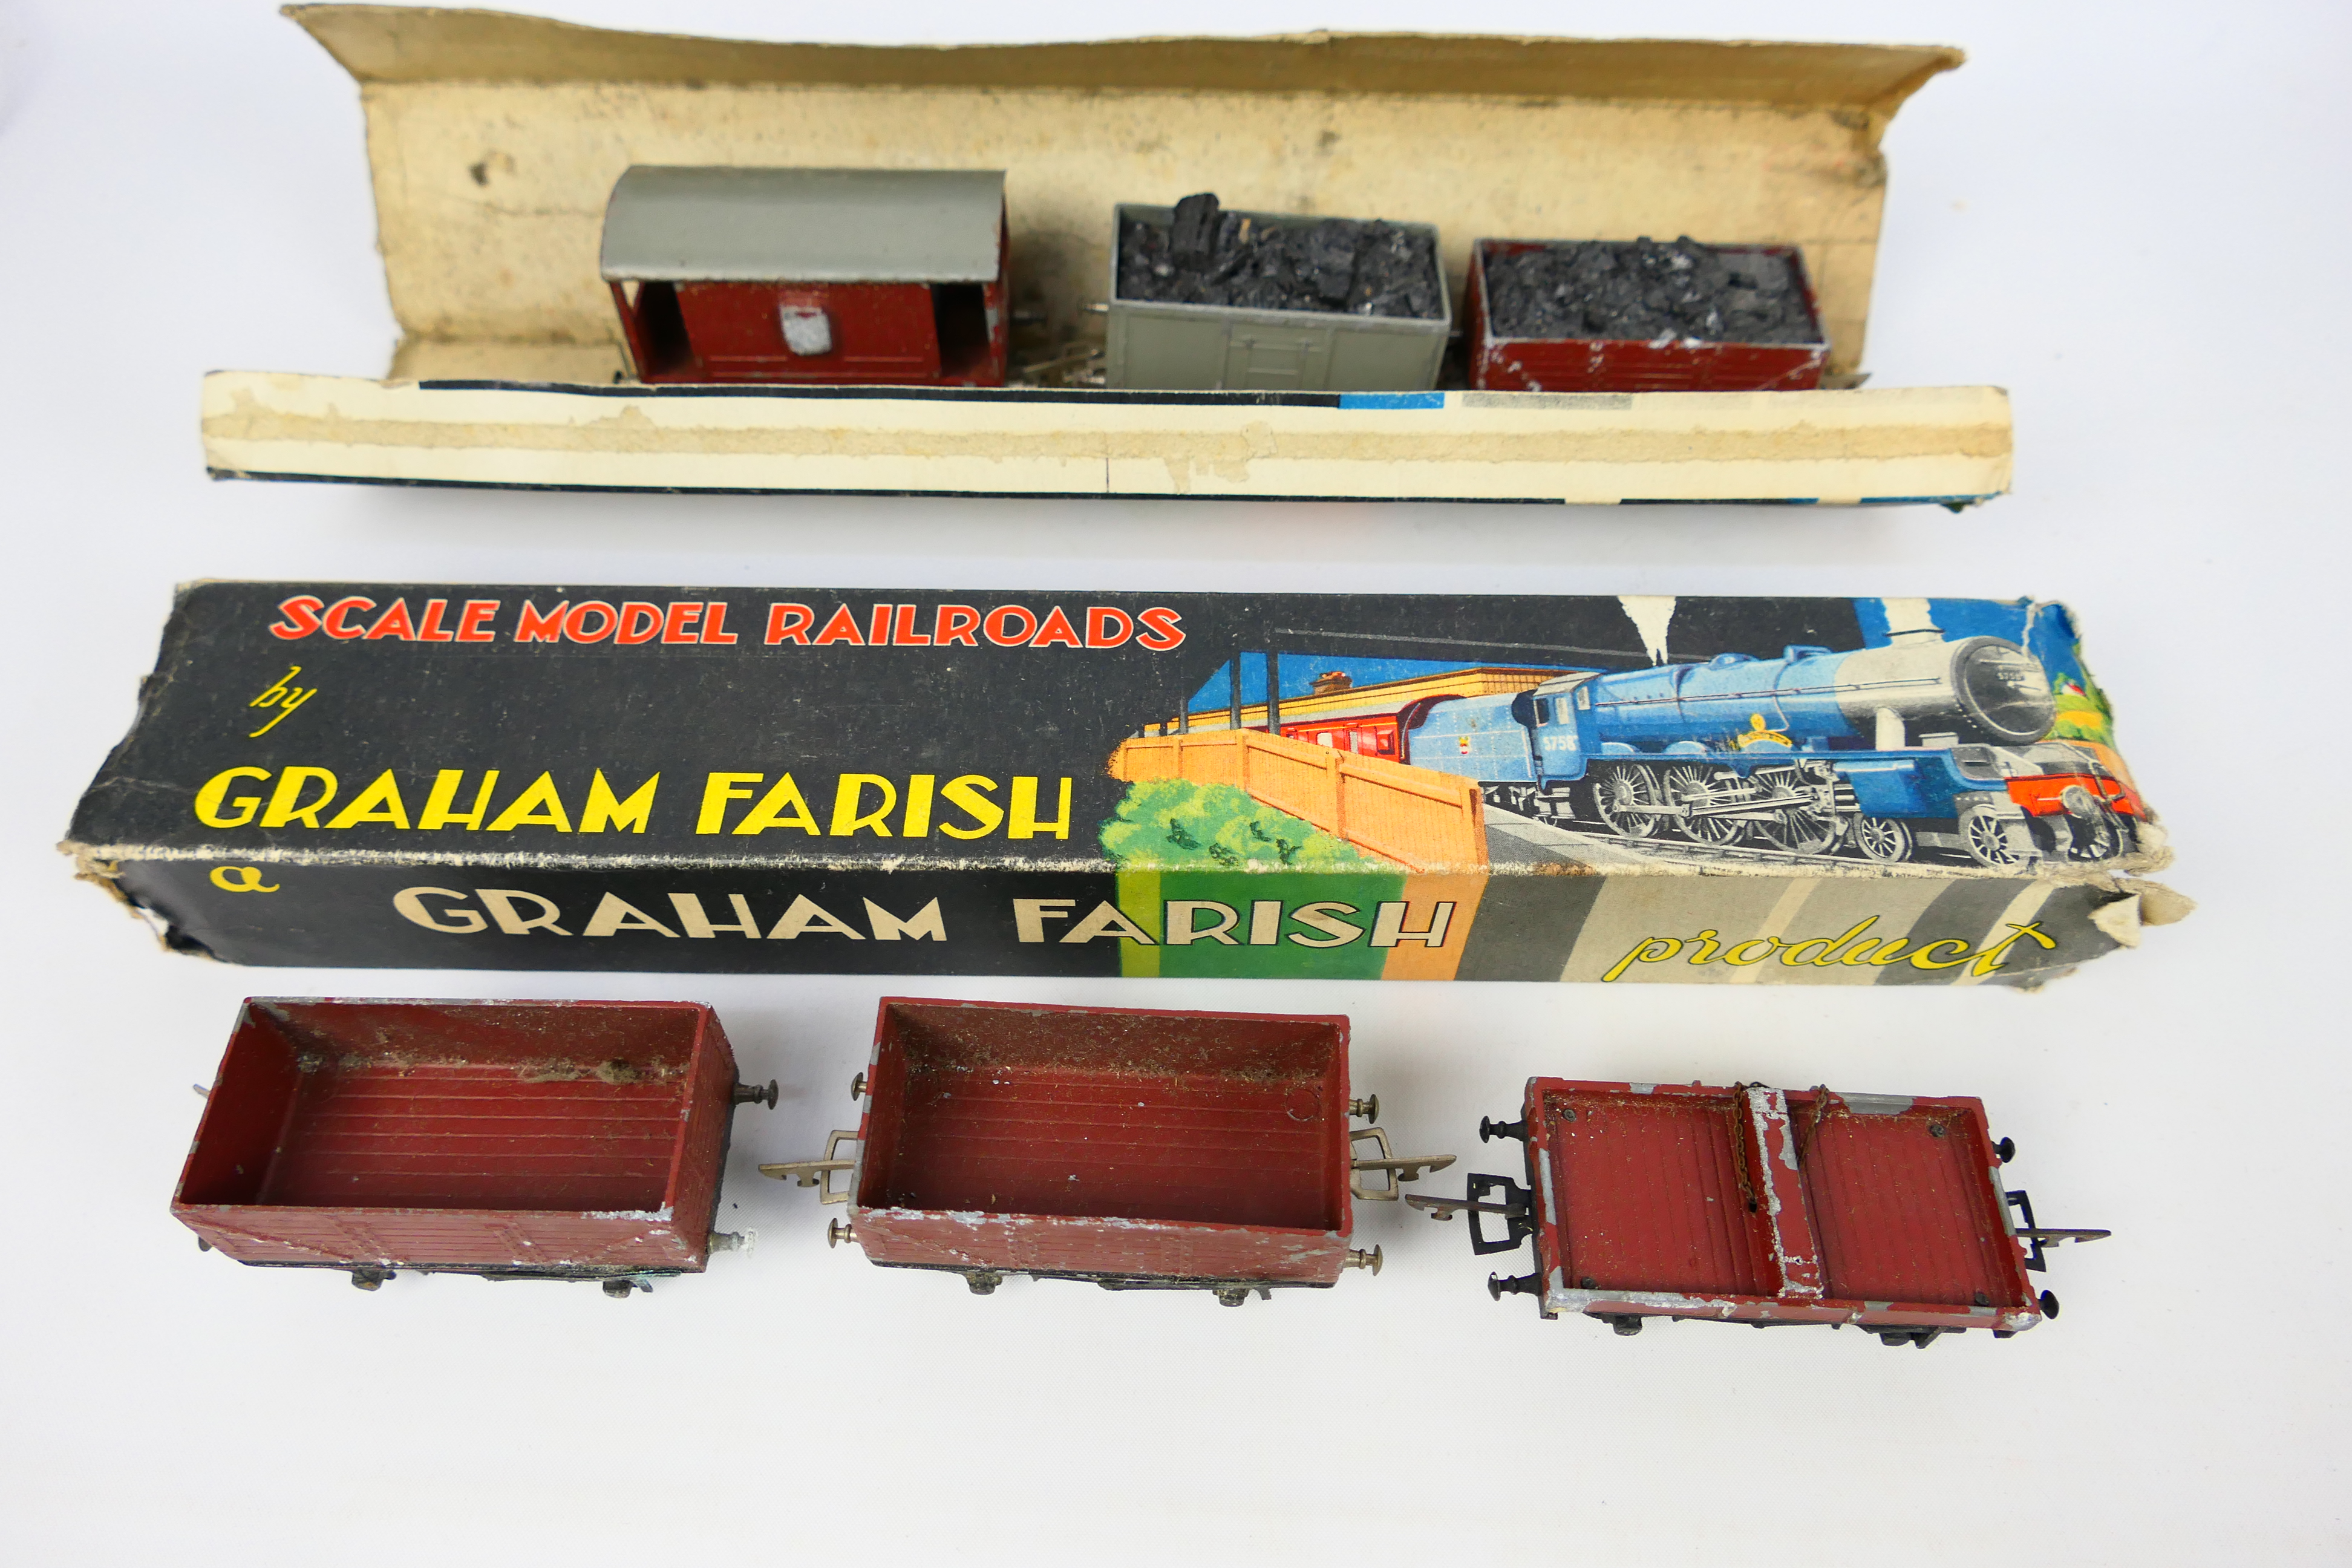 Graham Farish - A boxed vintage Graham Farish OO gauge electric train set with locomotive and - Image 11 of 18